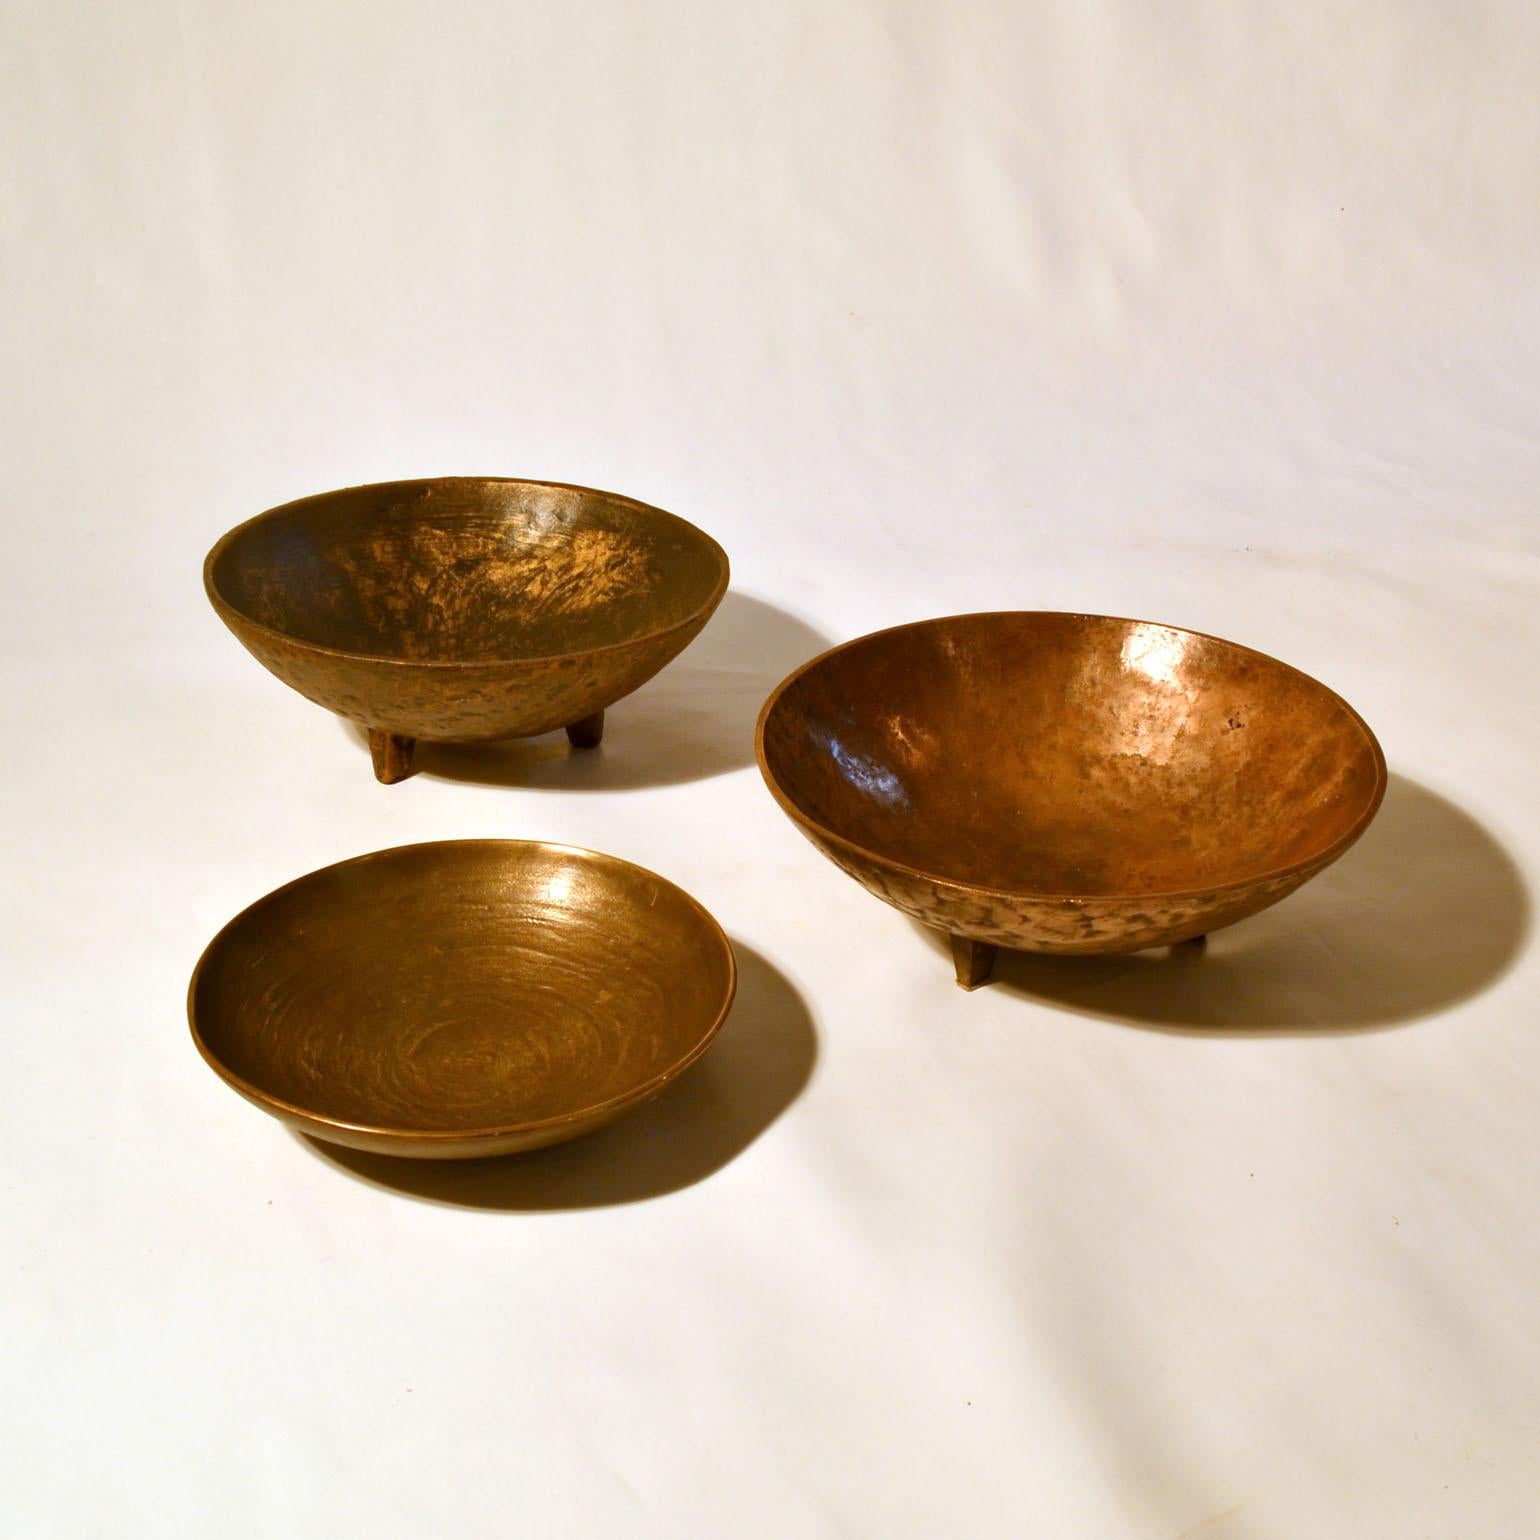 Set of three bronze cast bowls with subtle texture. Two are identical in shape on three legs with slightly different patina, and the third a bit smaller signed Pabst 173.